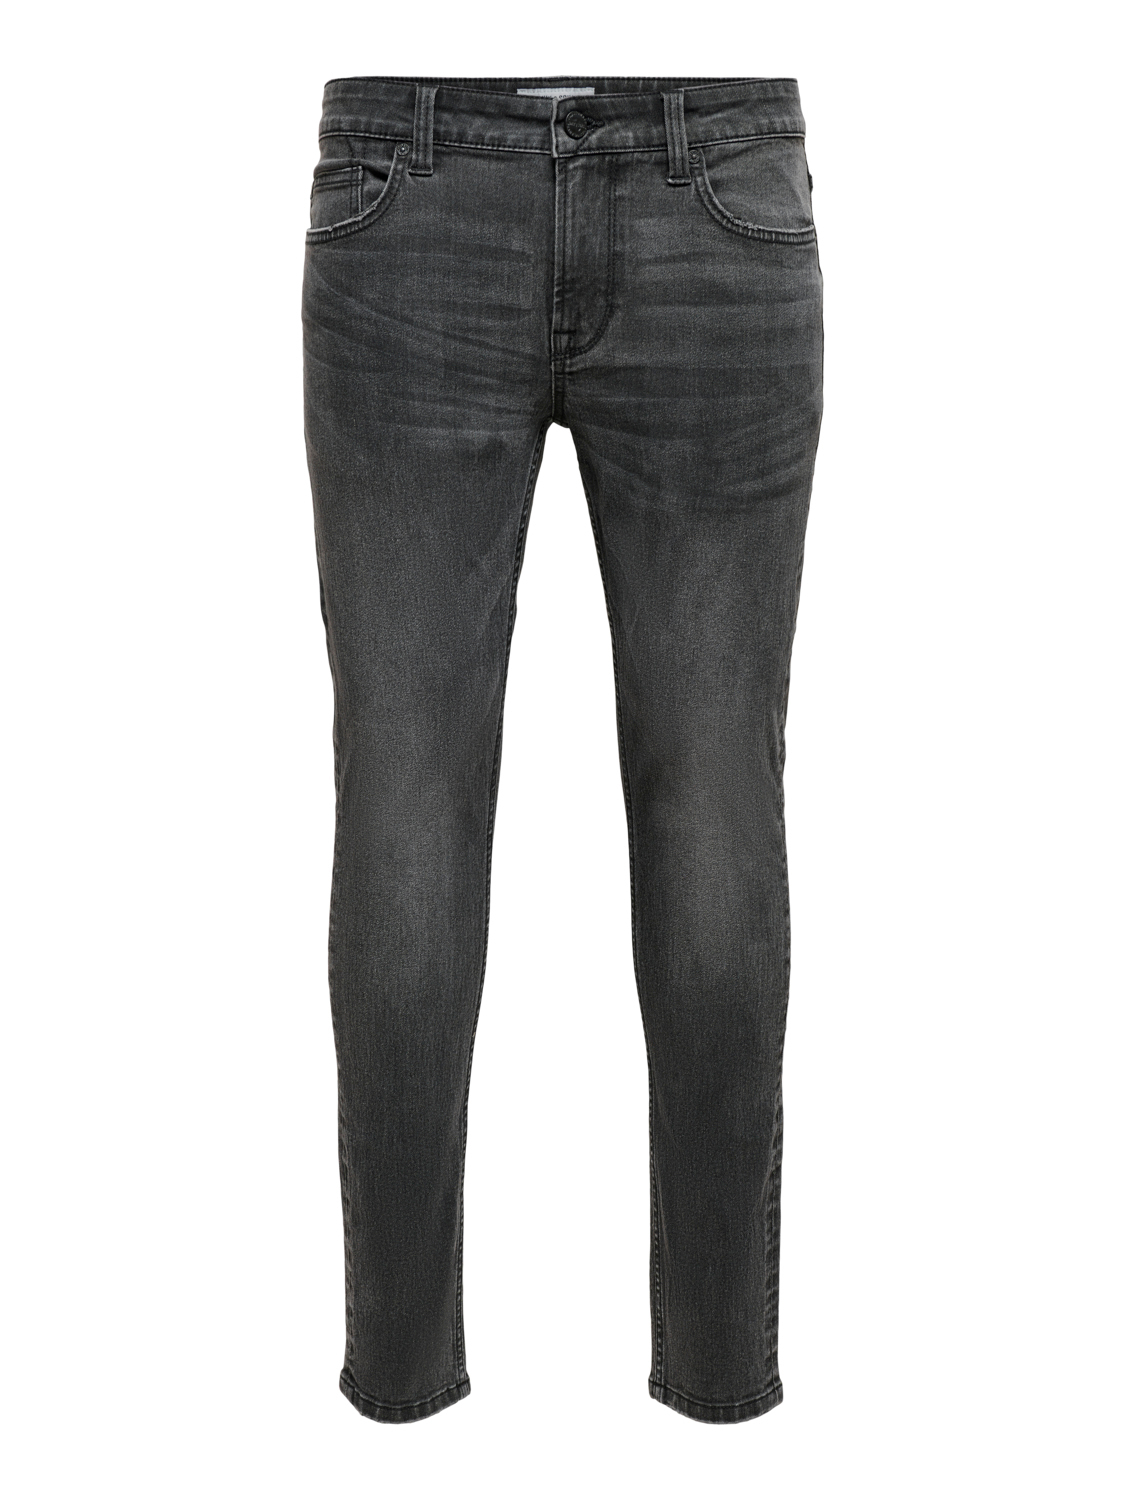 Only & Sons Jeans Warp in Nero 